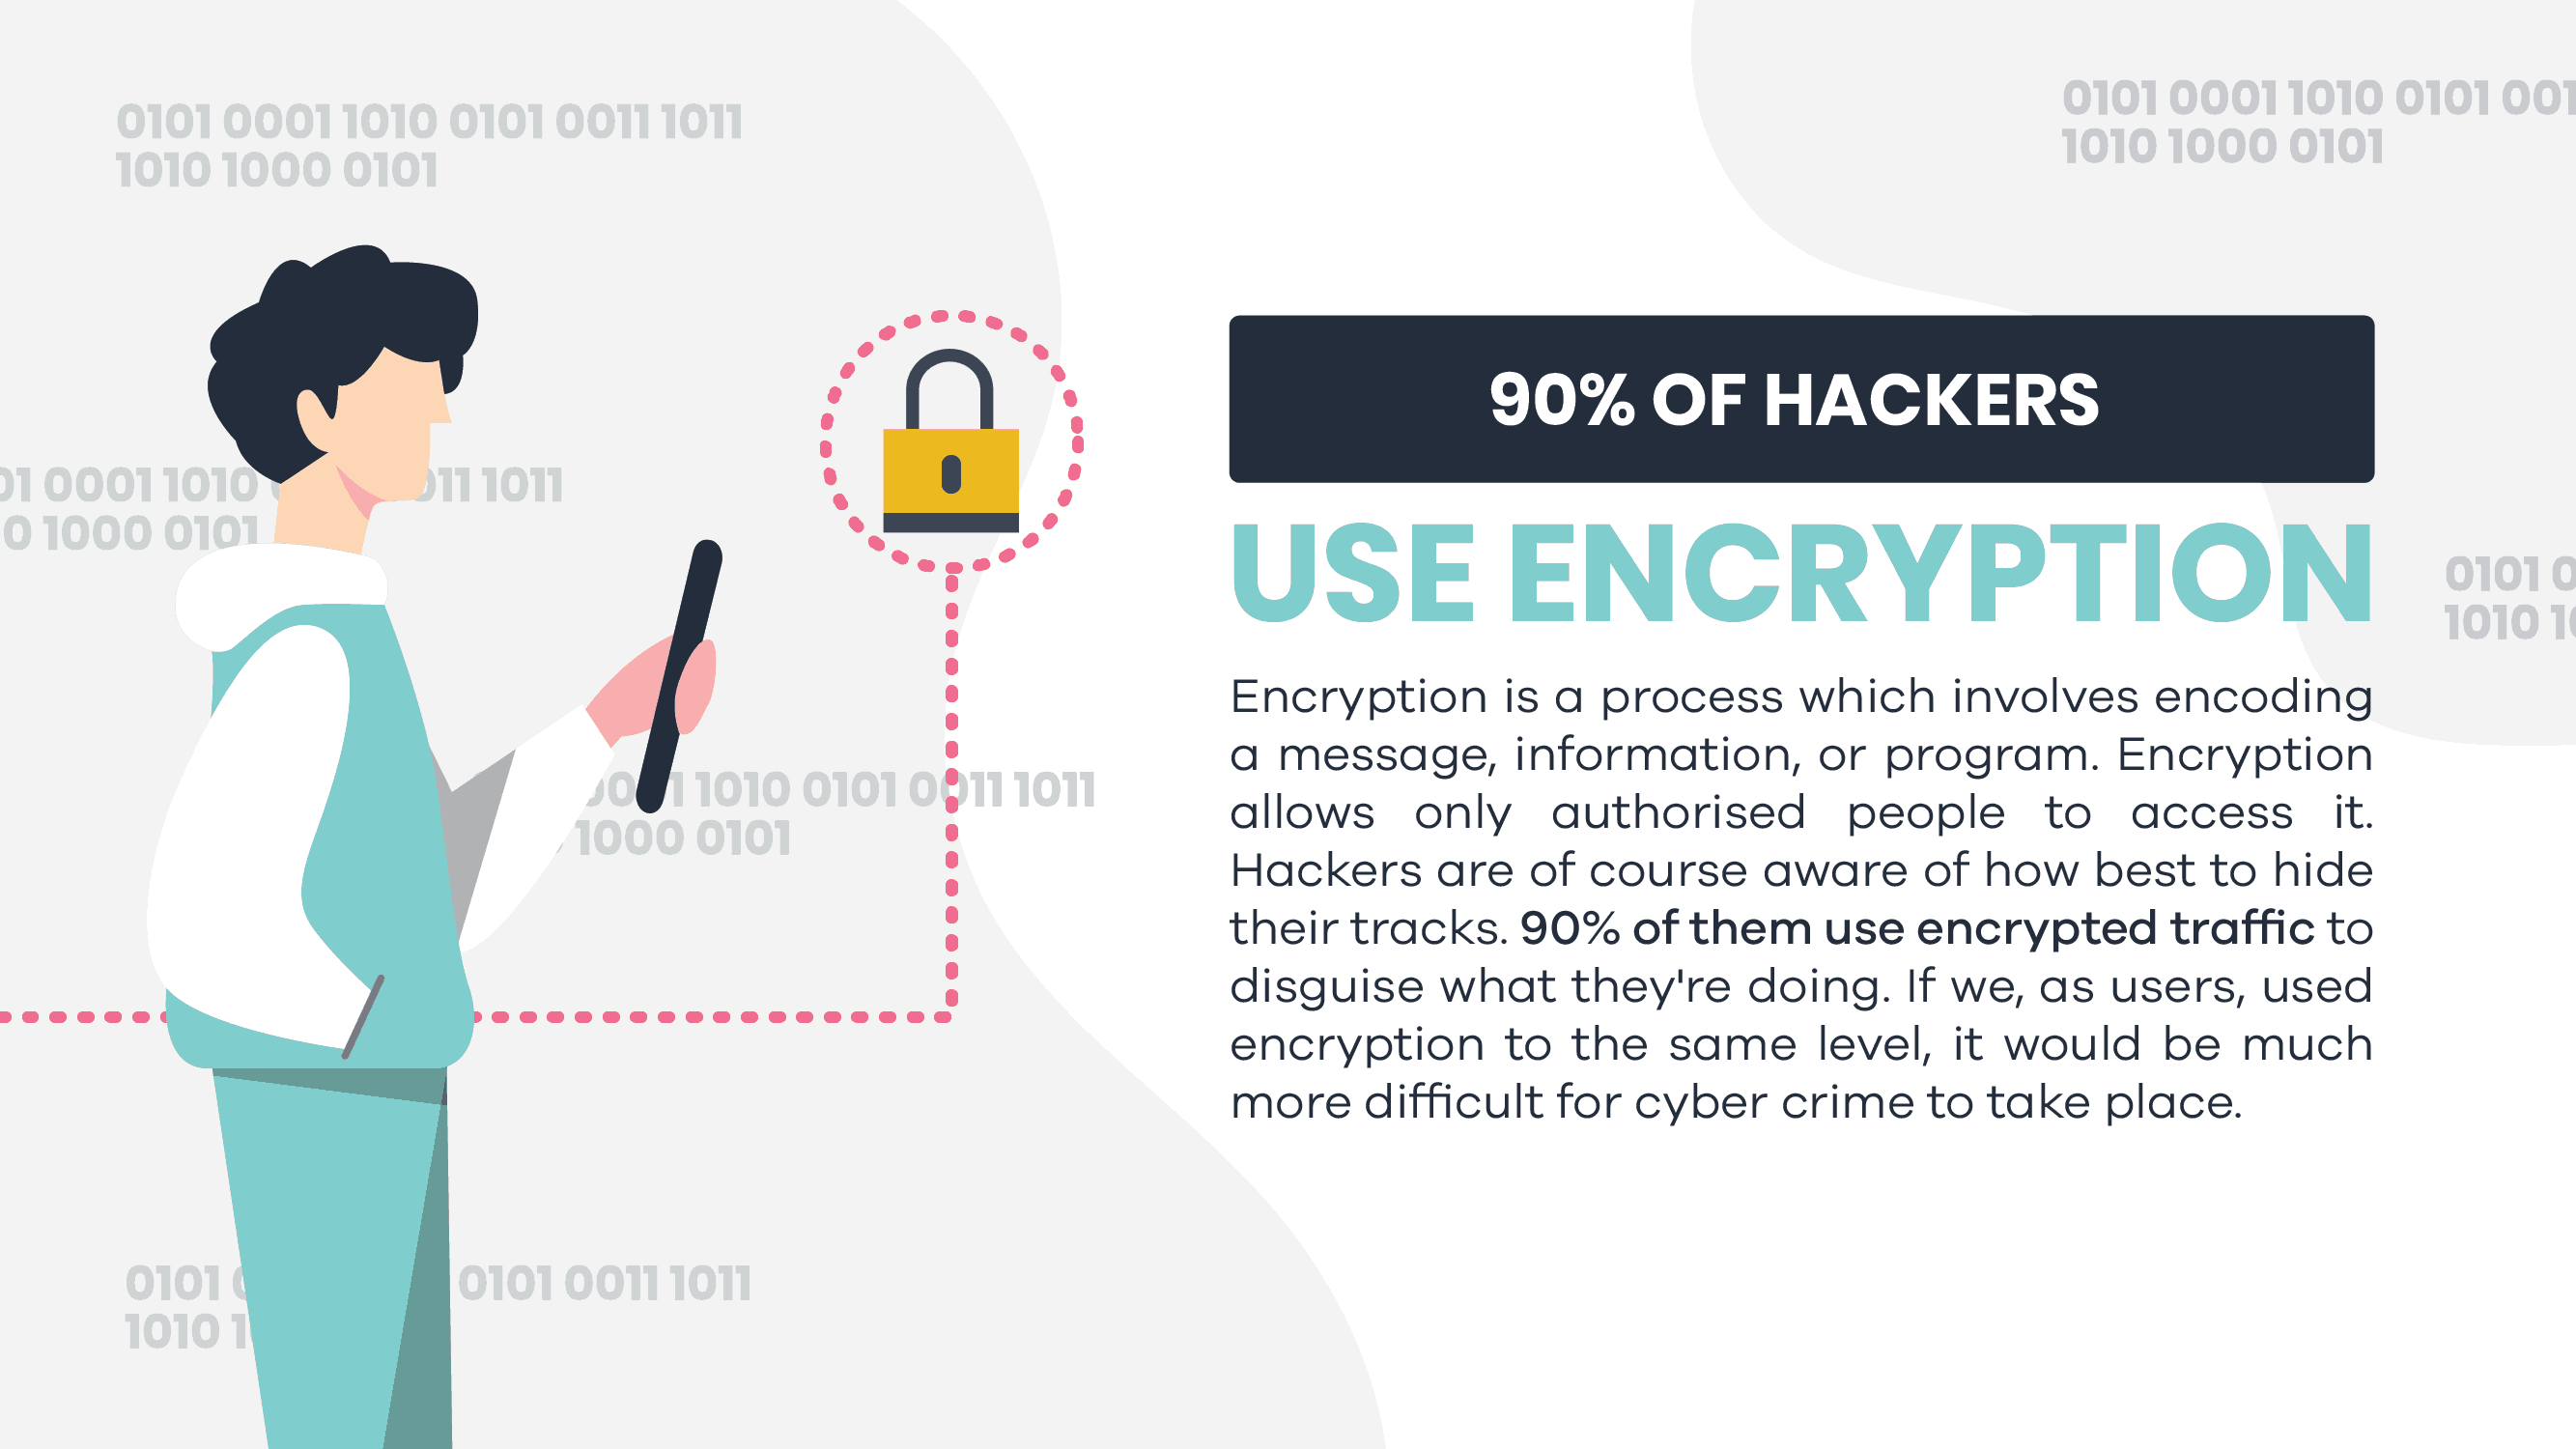 90% of hackers use encryption